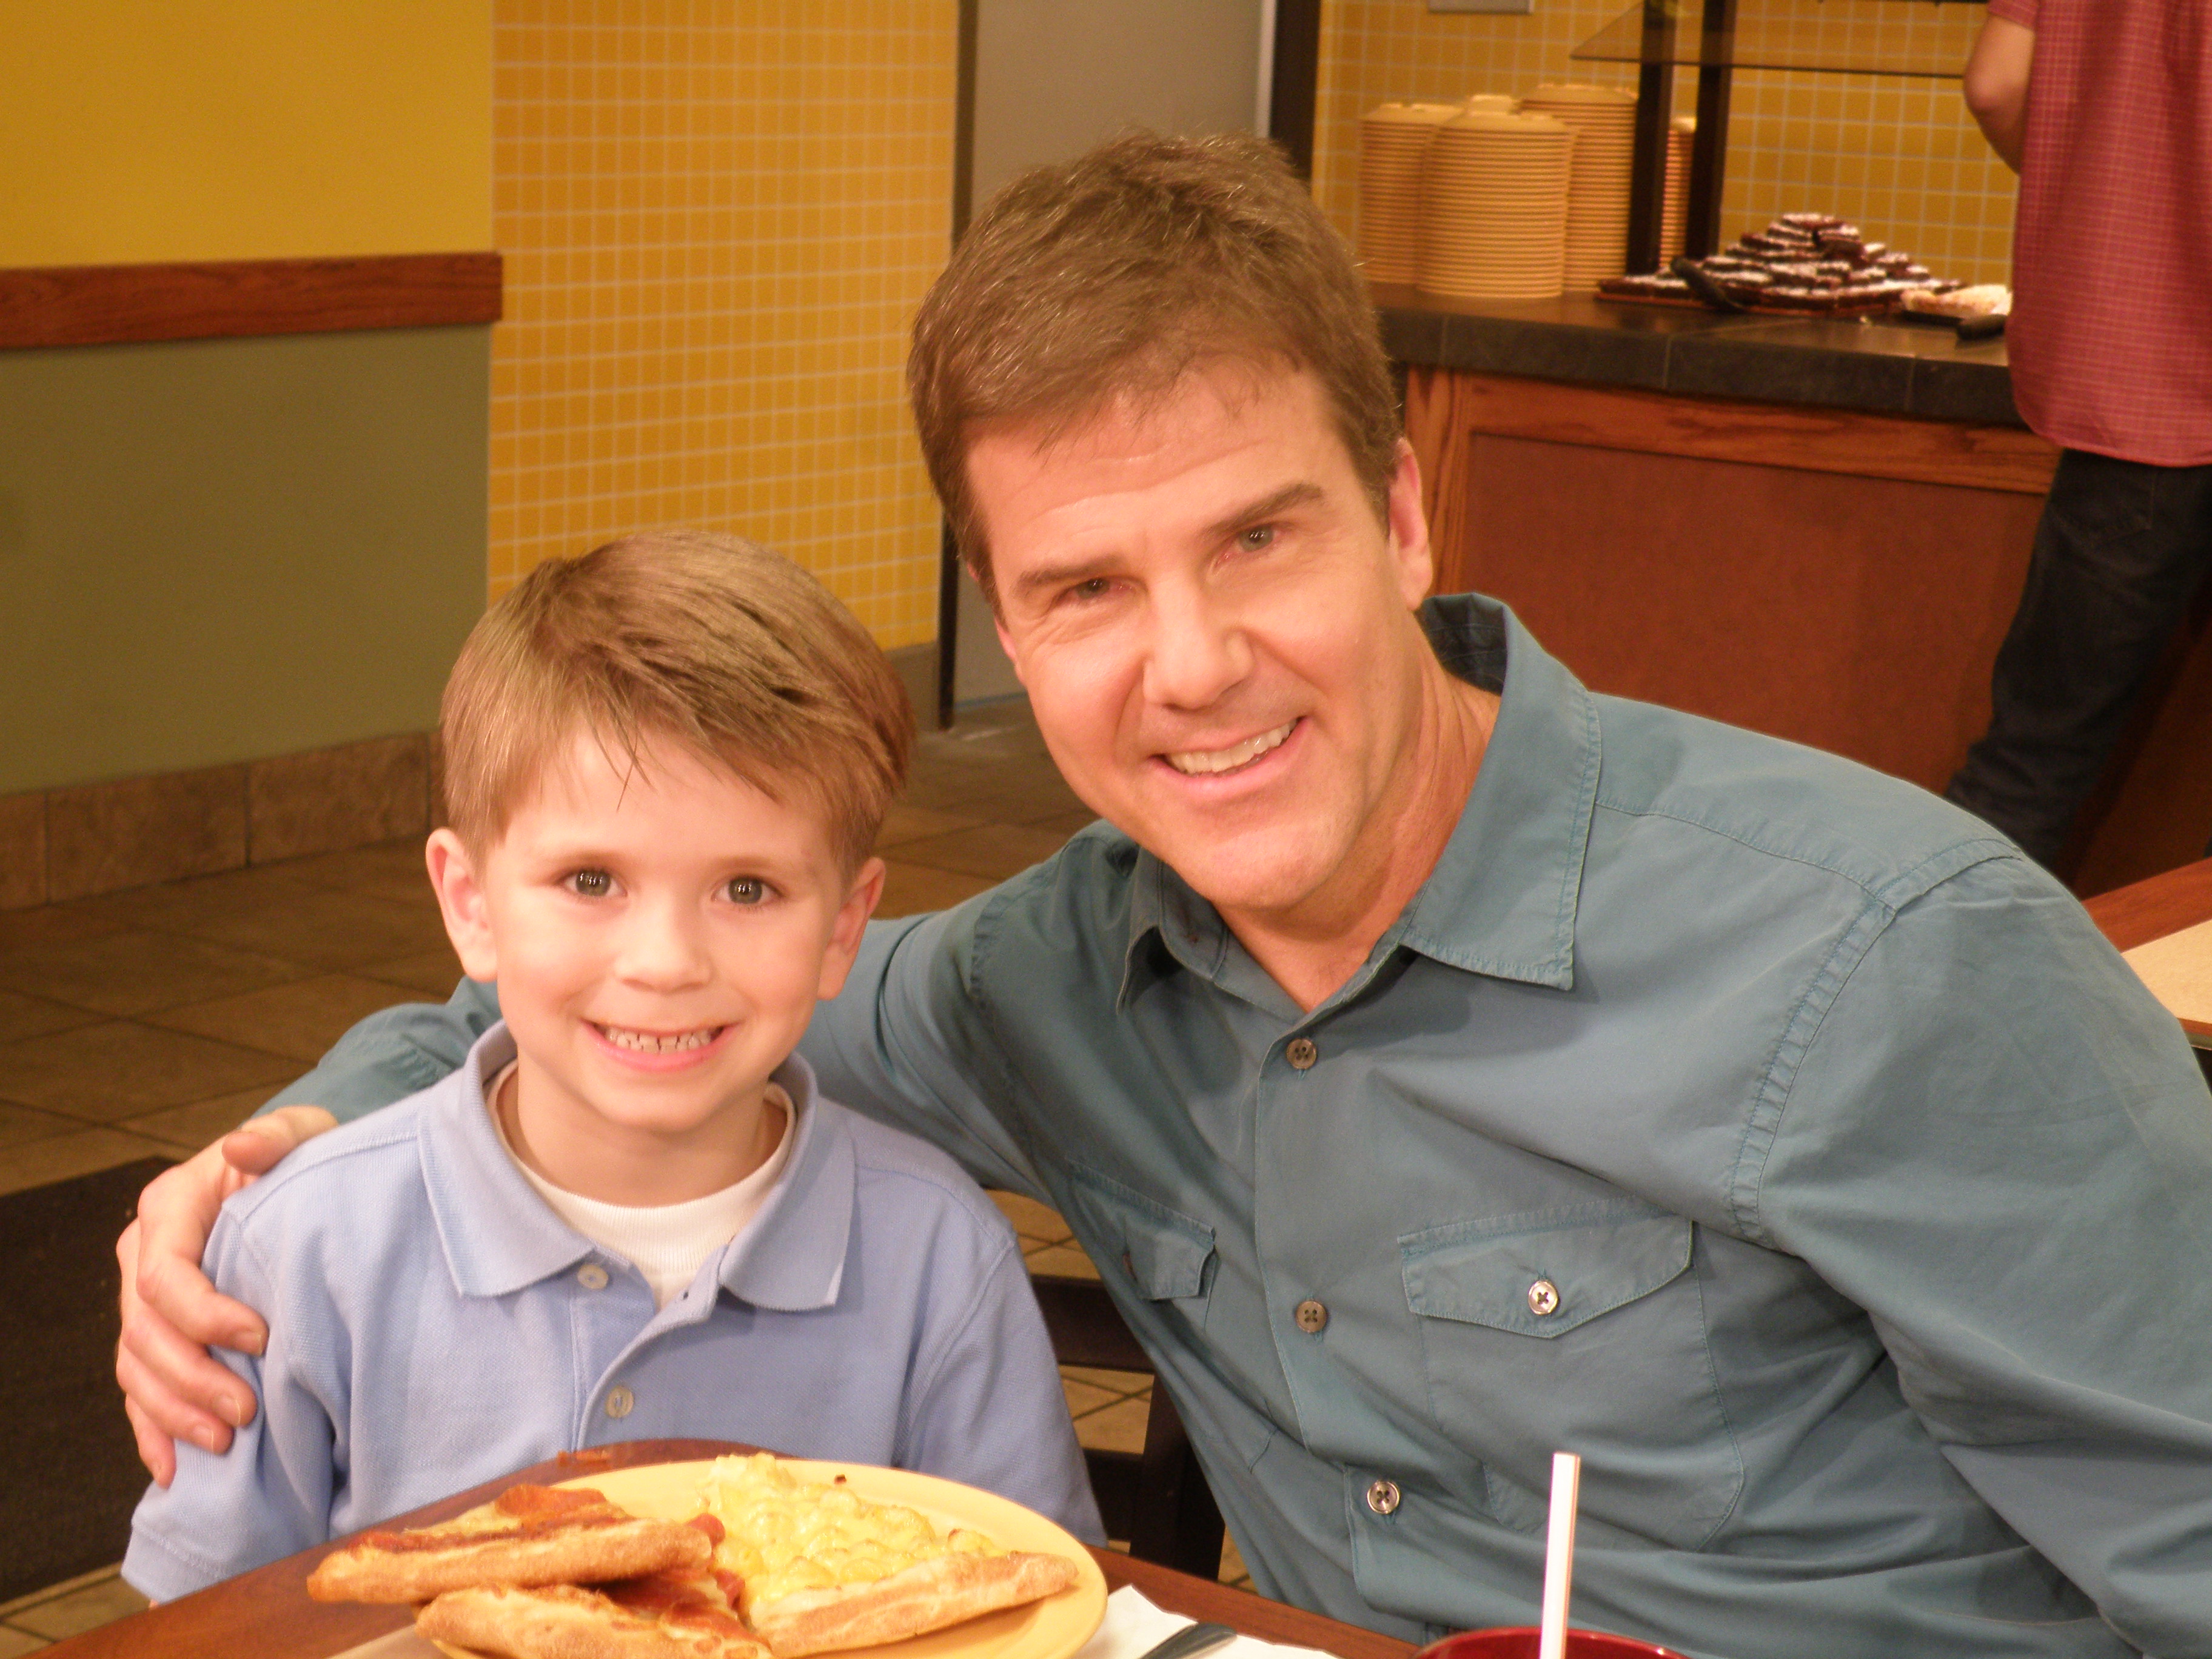 Chase on set with TBS Dinner and a Movie's host Paul Gilmartin